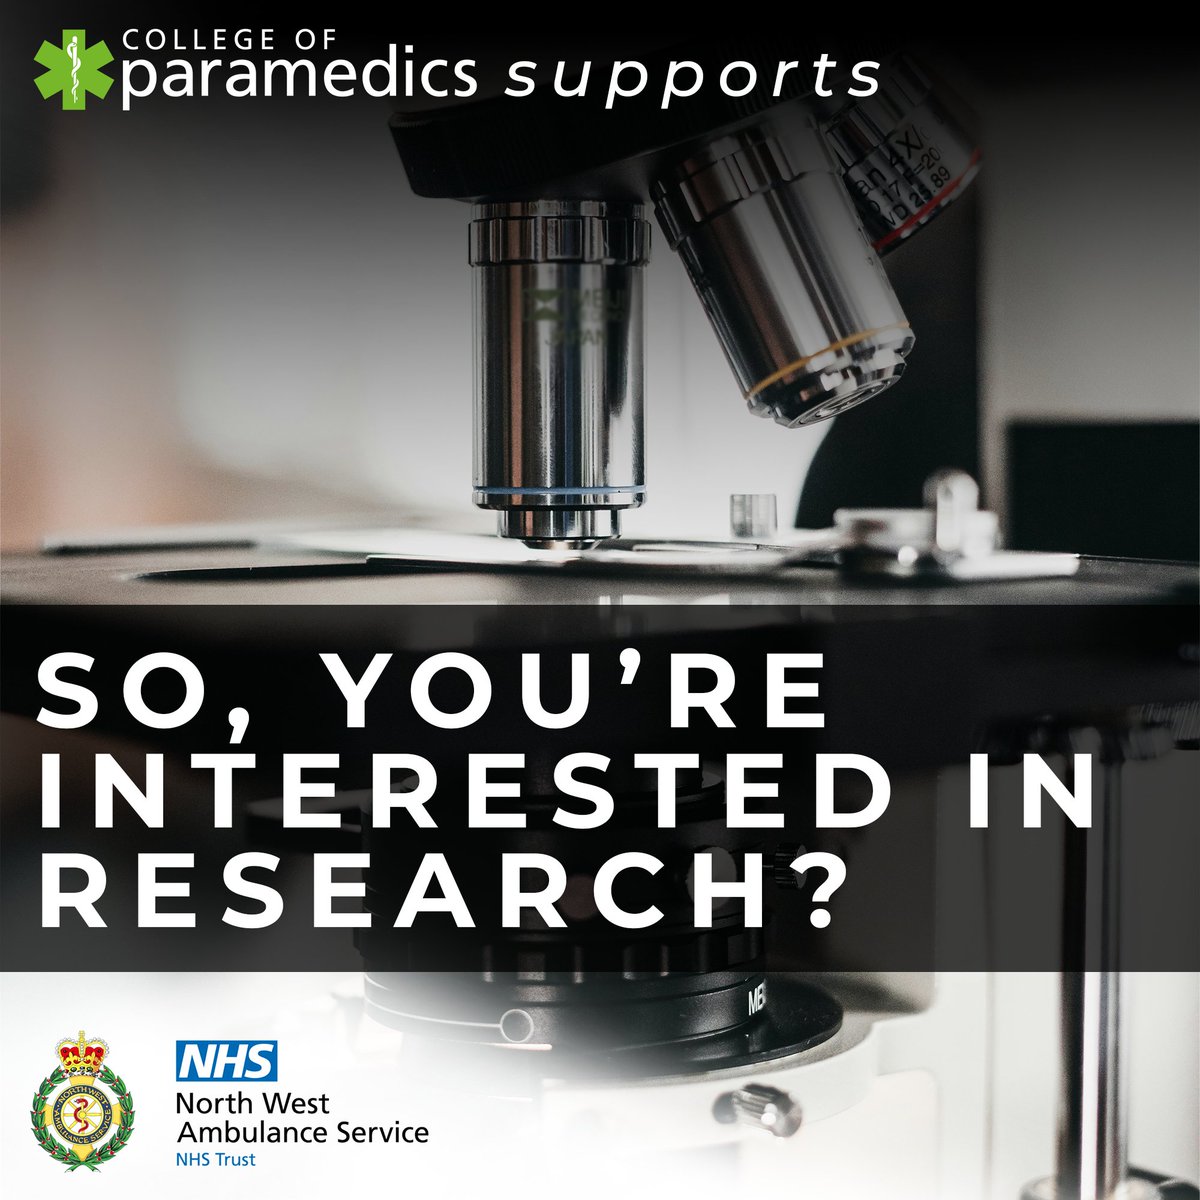 The Betty Pennington Research Award is now open for applications from new and early career researchers (with less than 5 years experience in research) who are full, student or associate members of the College of Paramedics 🚑 Info and application here 👉bit.ly/4a6KESk